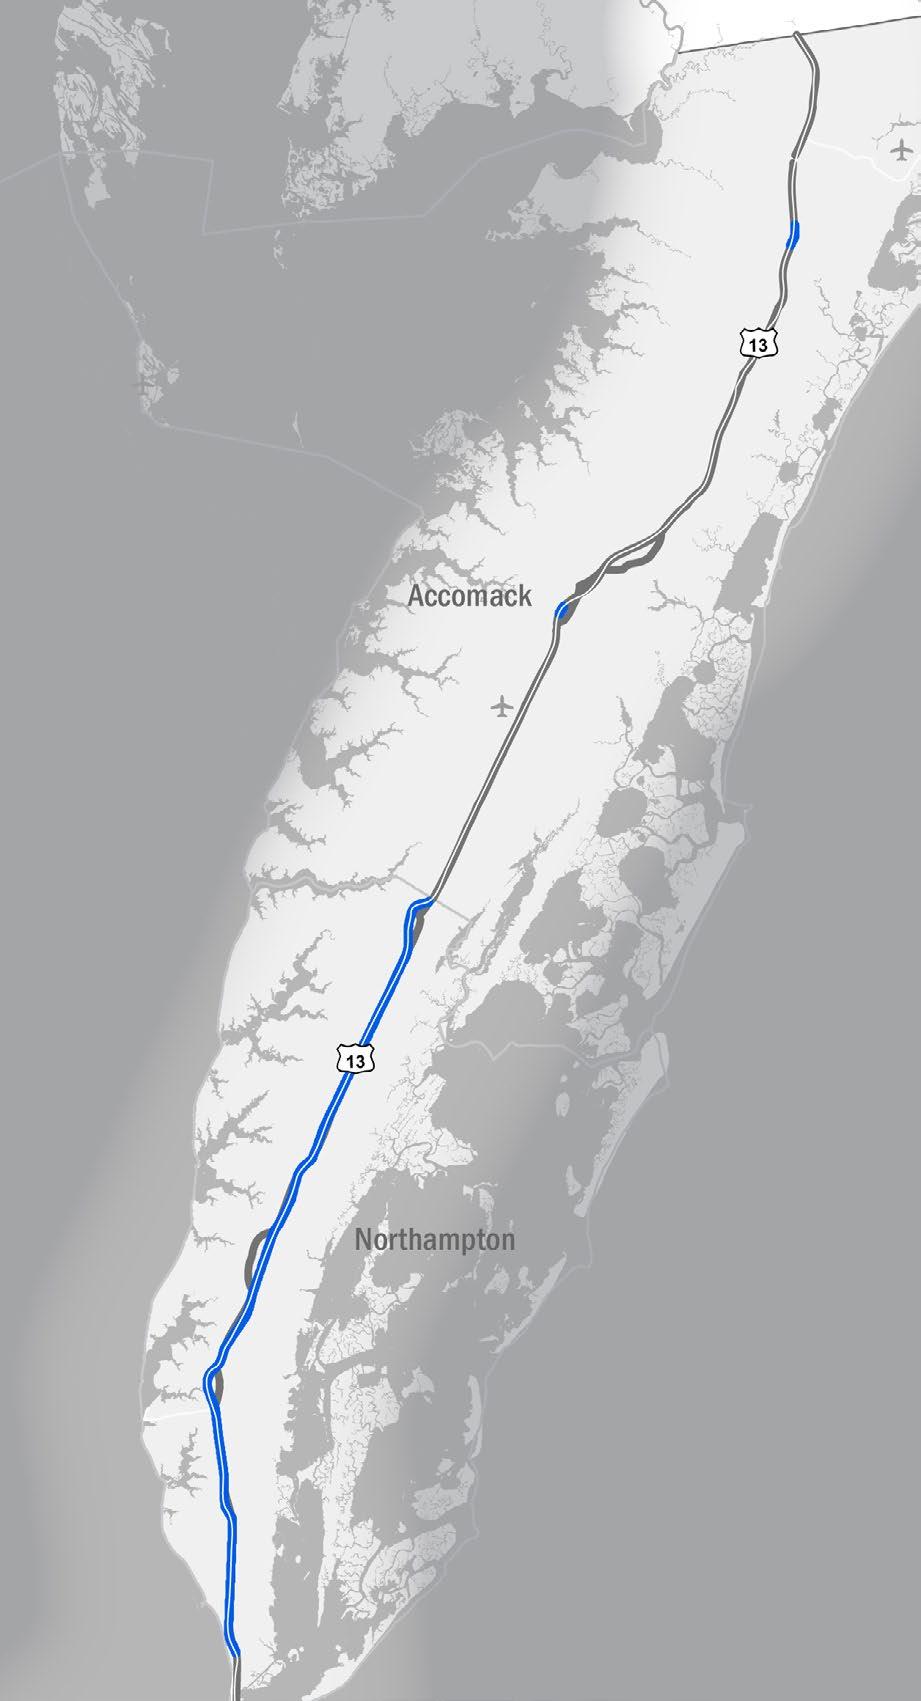 Number of Lanes (both directions) Segment D2 begins at the northern terminus of the Chesapeake Bay Bridge-Tunnel and progresses north to the Maryland border, serving Northampton and Accomack Counties.